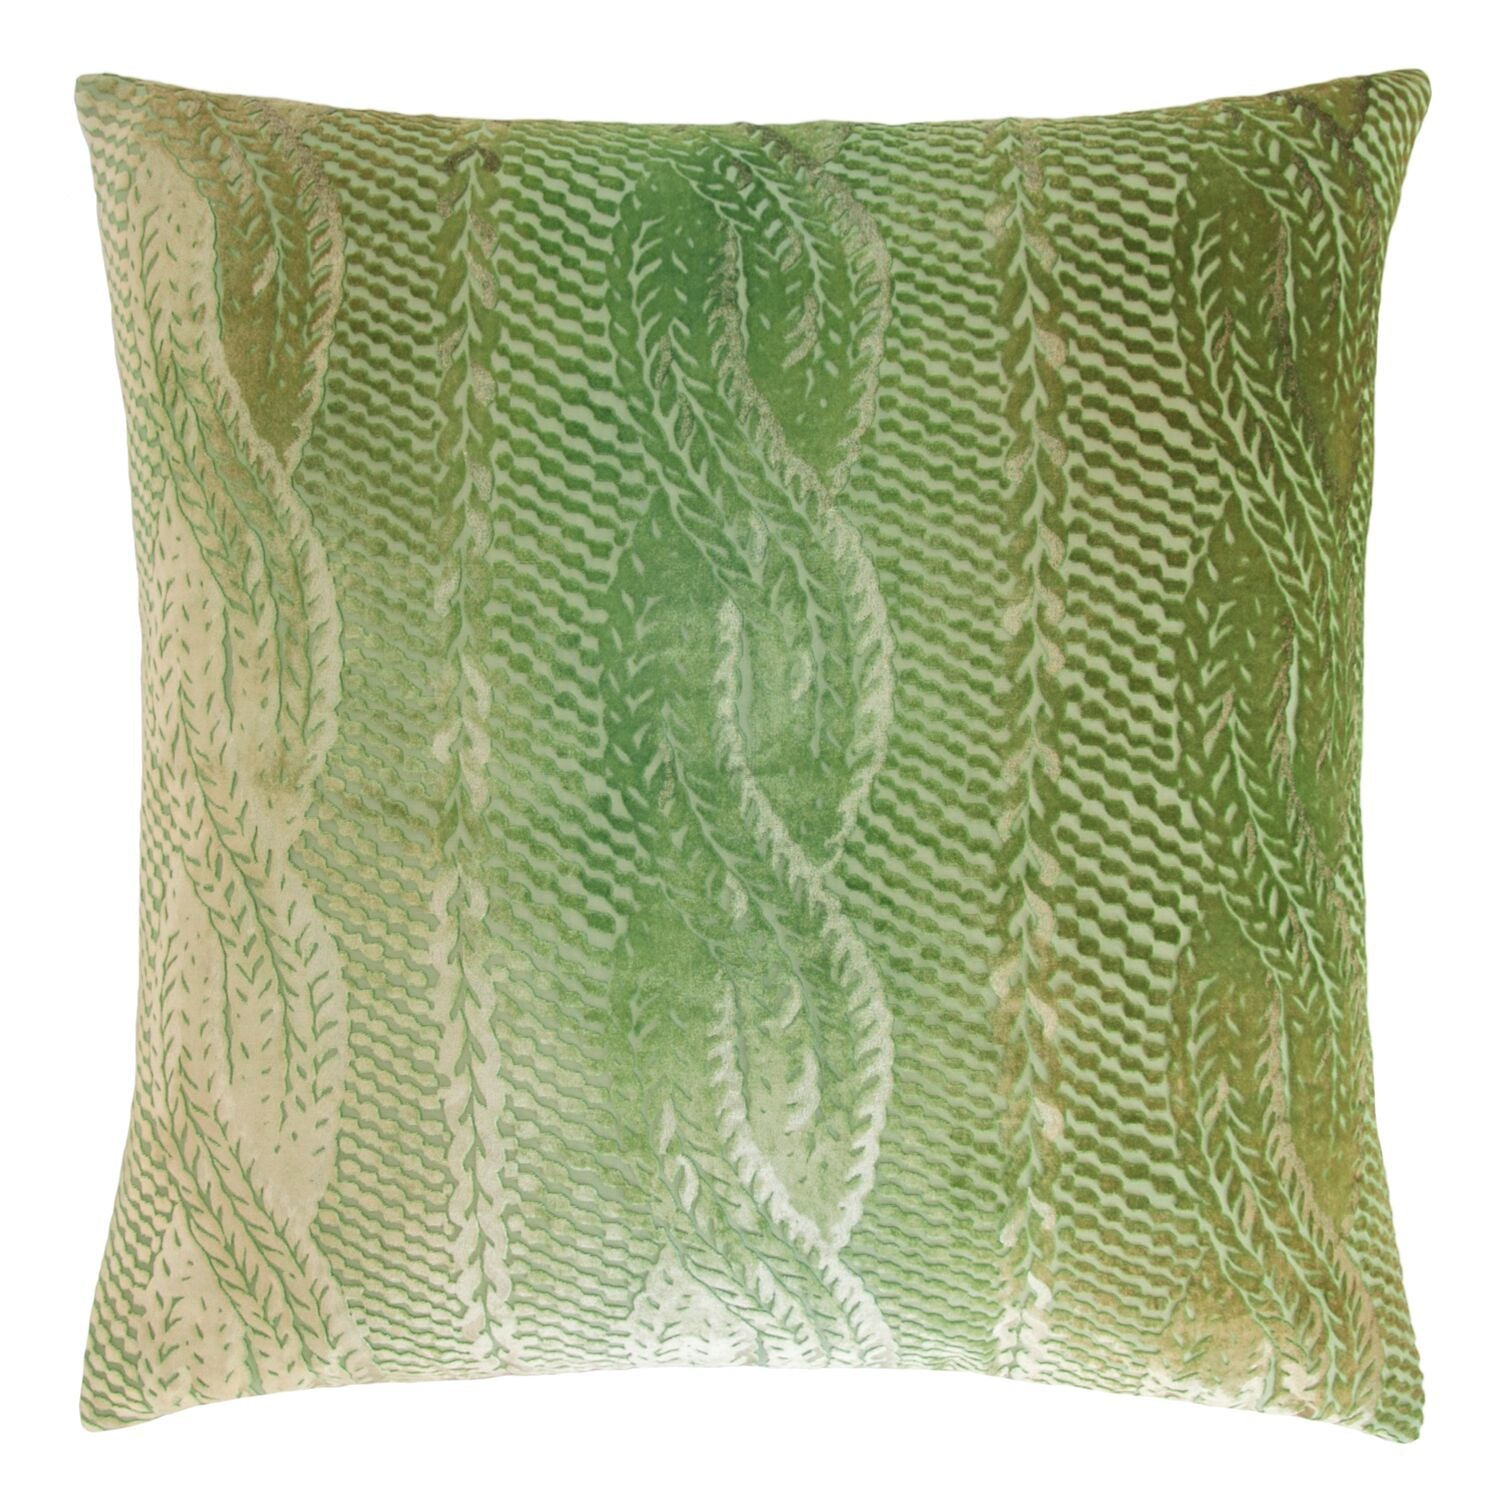 Grass Cable Knit Velvet Pillows by Kevin O'Brien Studio | Fig Linens